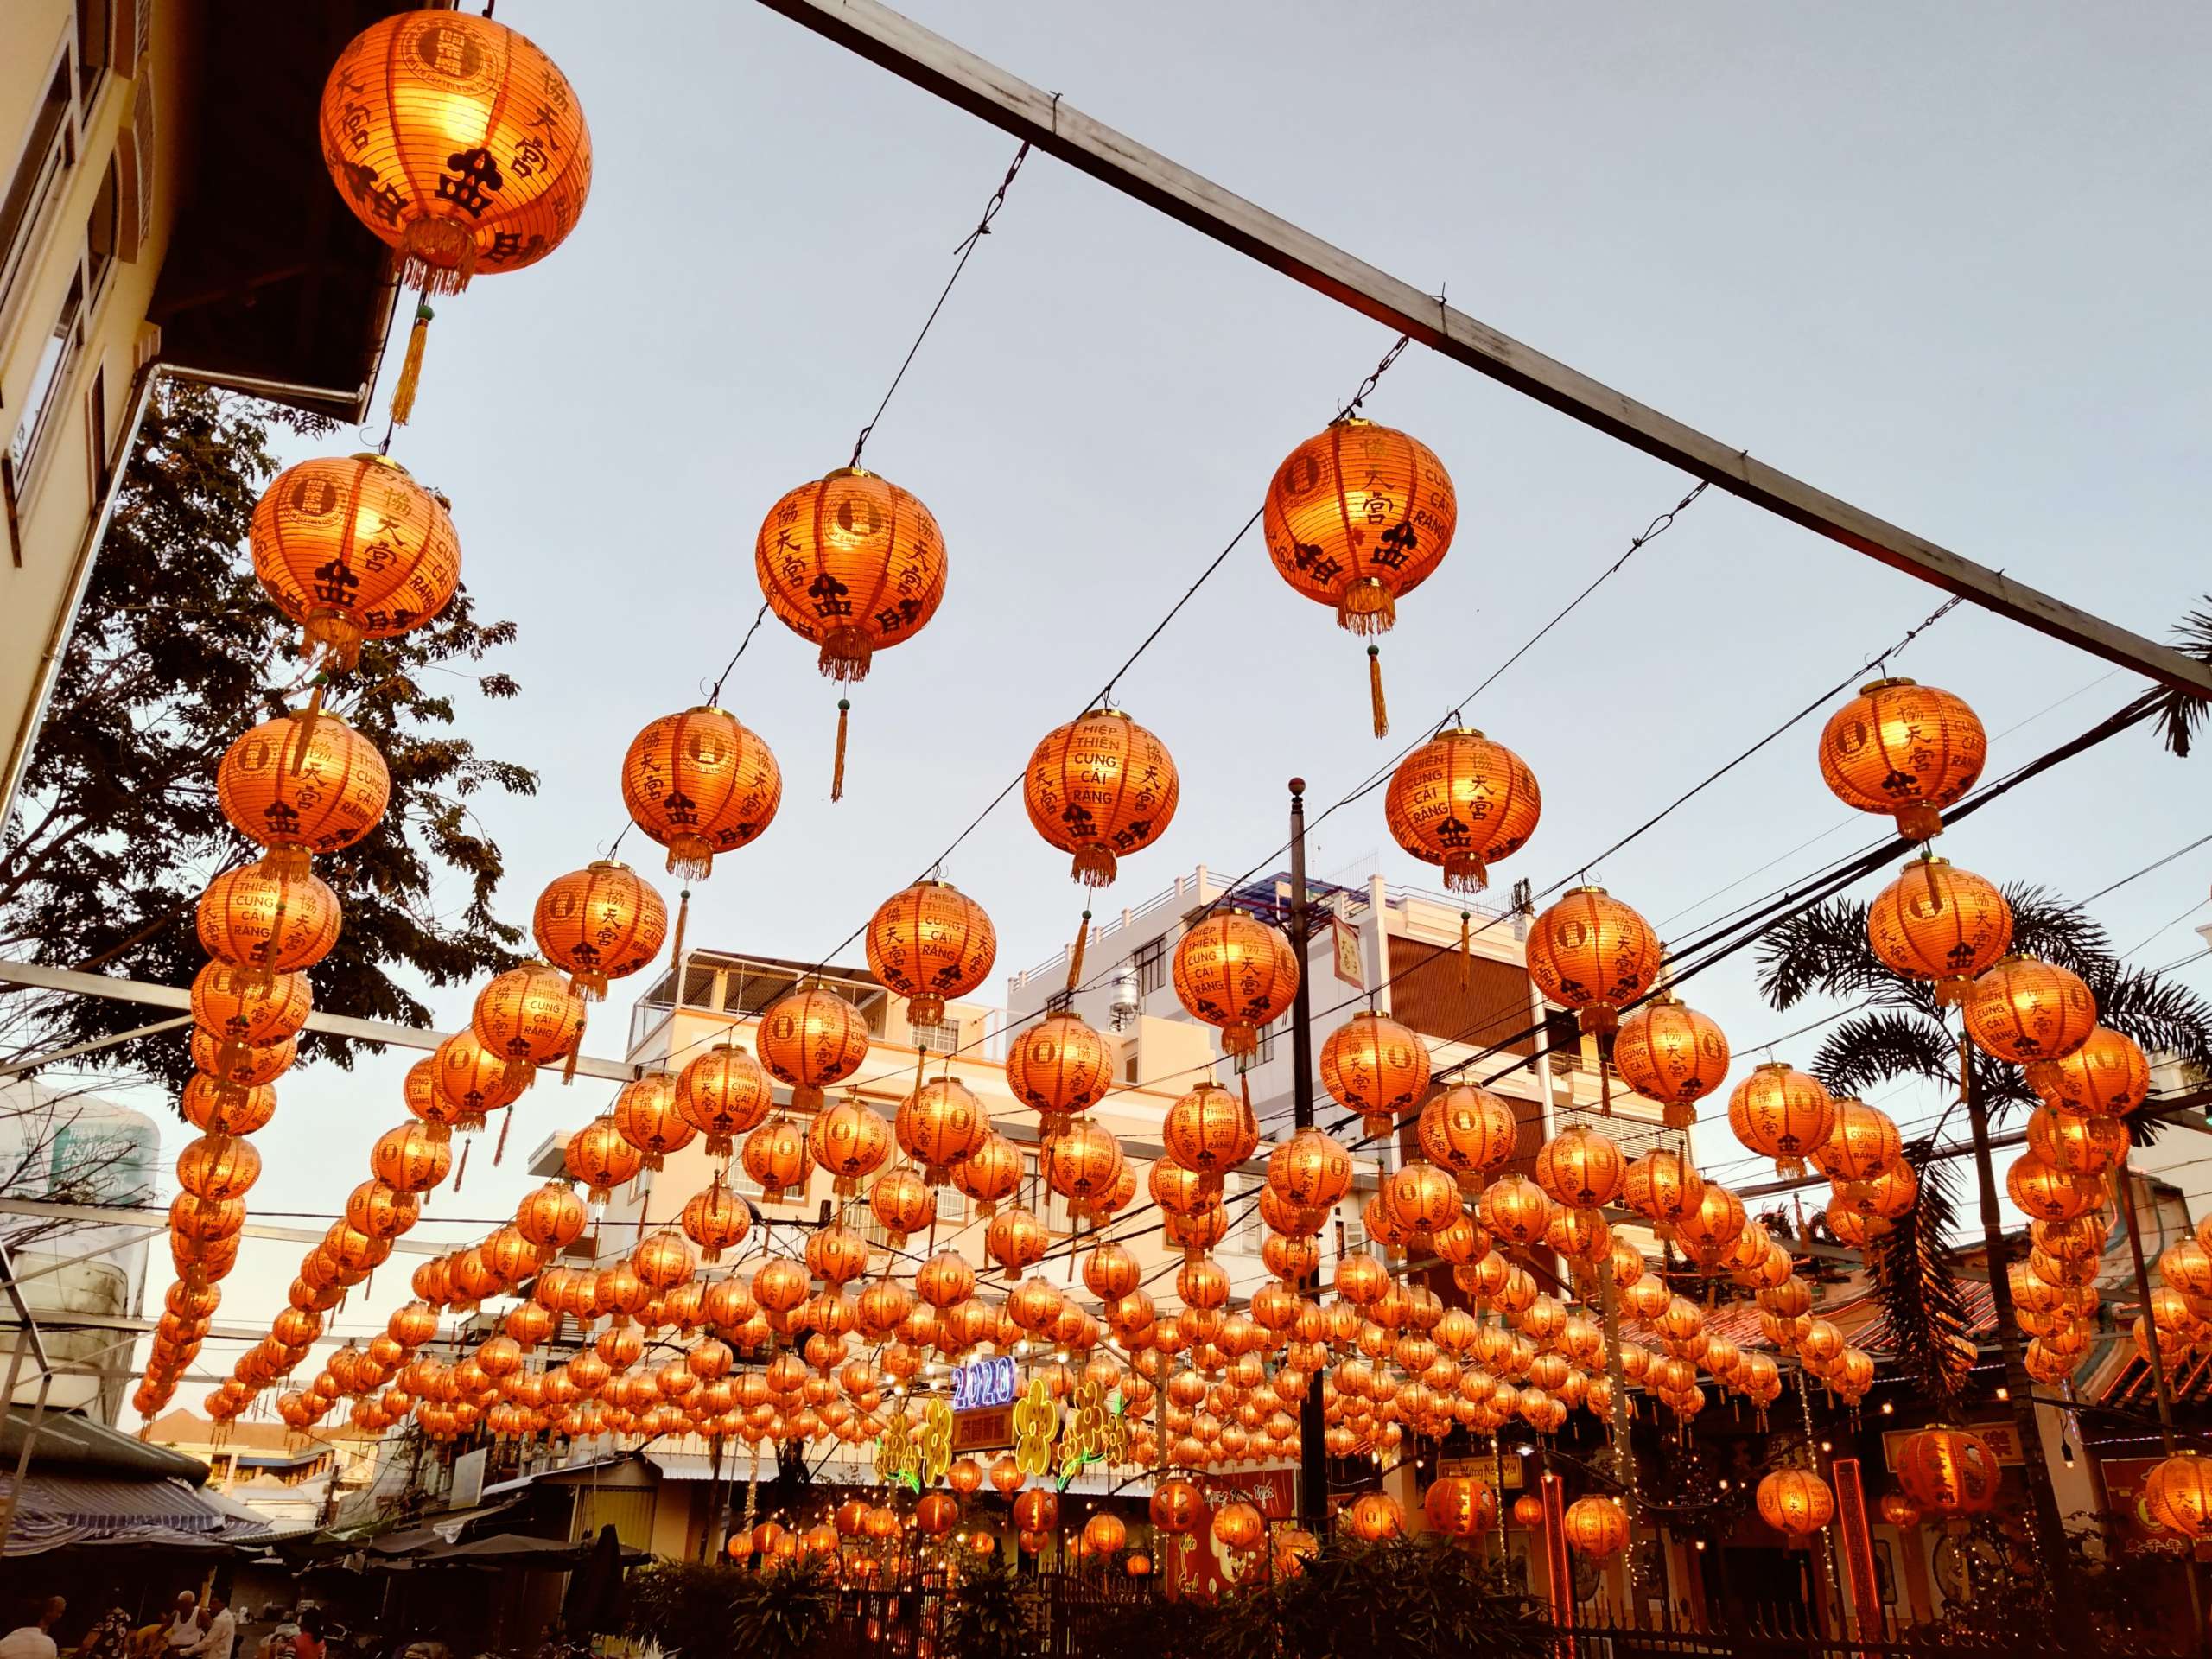 Chinese lantern illuminate an overhead structure, celebrating the Lunar New Year